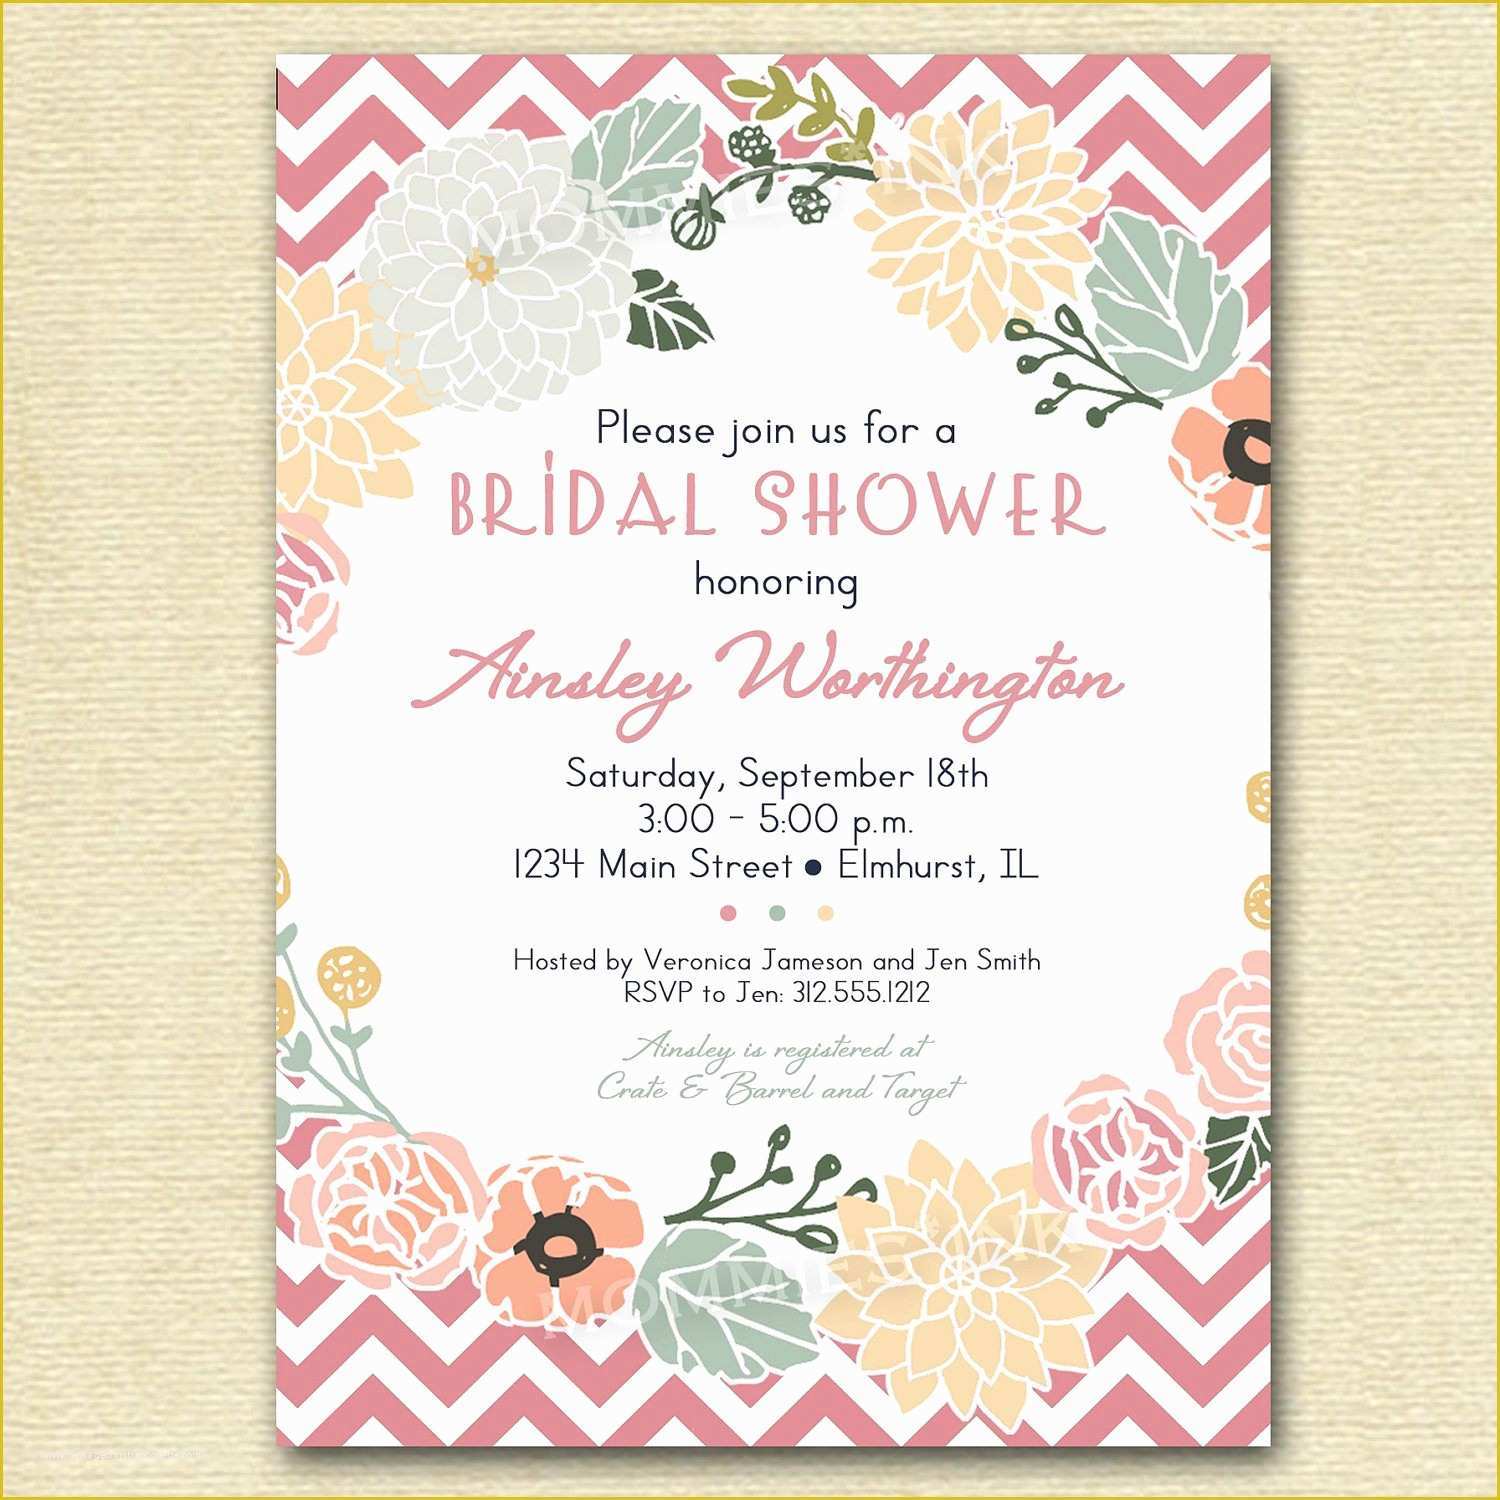 Free Bridal Shower Templates Of event Invitation Graduation Invitations New Invitation